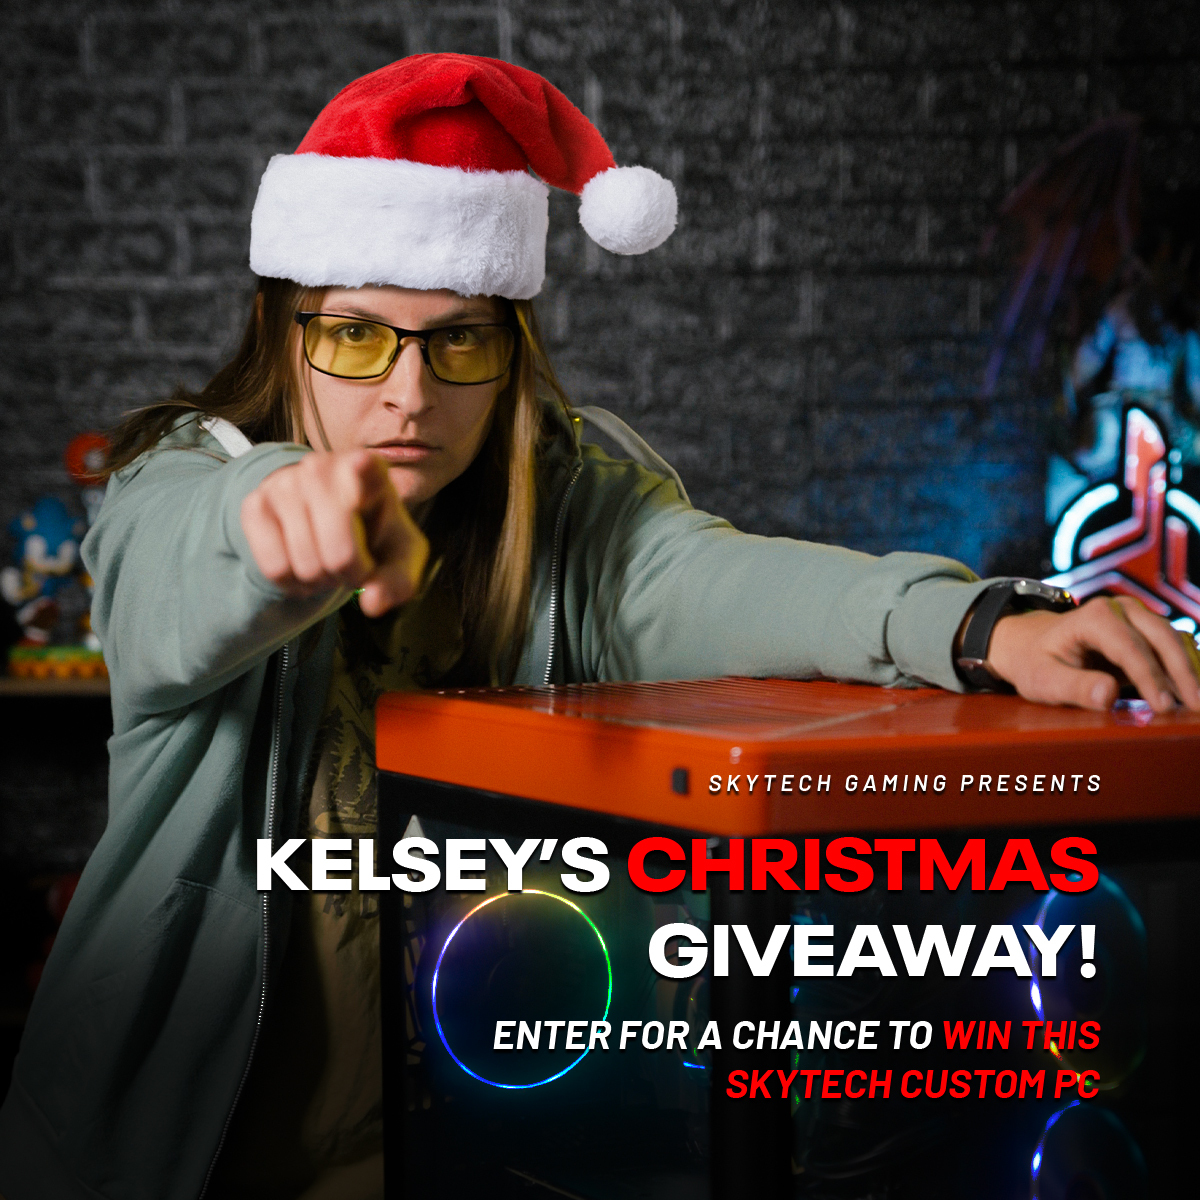 HEY YOU! Do you want to win a Free PC?! Well you're in luck. 🎁 Just in time for Christmas, we are giving away this beautiful custom built Skytech PC that was hand built by Kelsey herself. 🎄 Click Here to Enter --> pulse.ly/moqvaawbdn